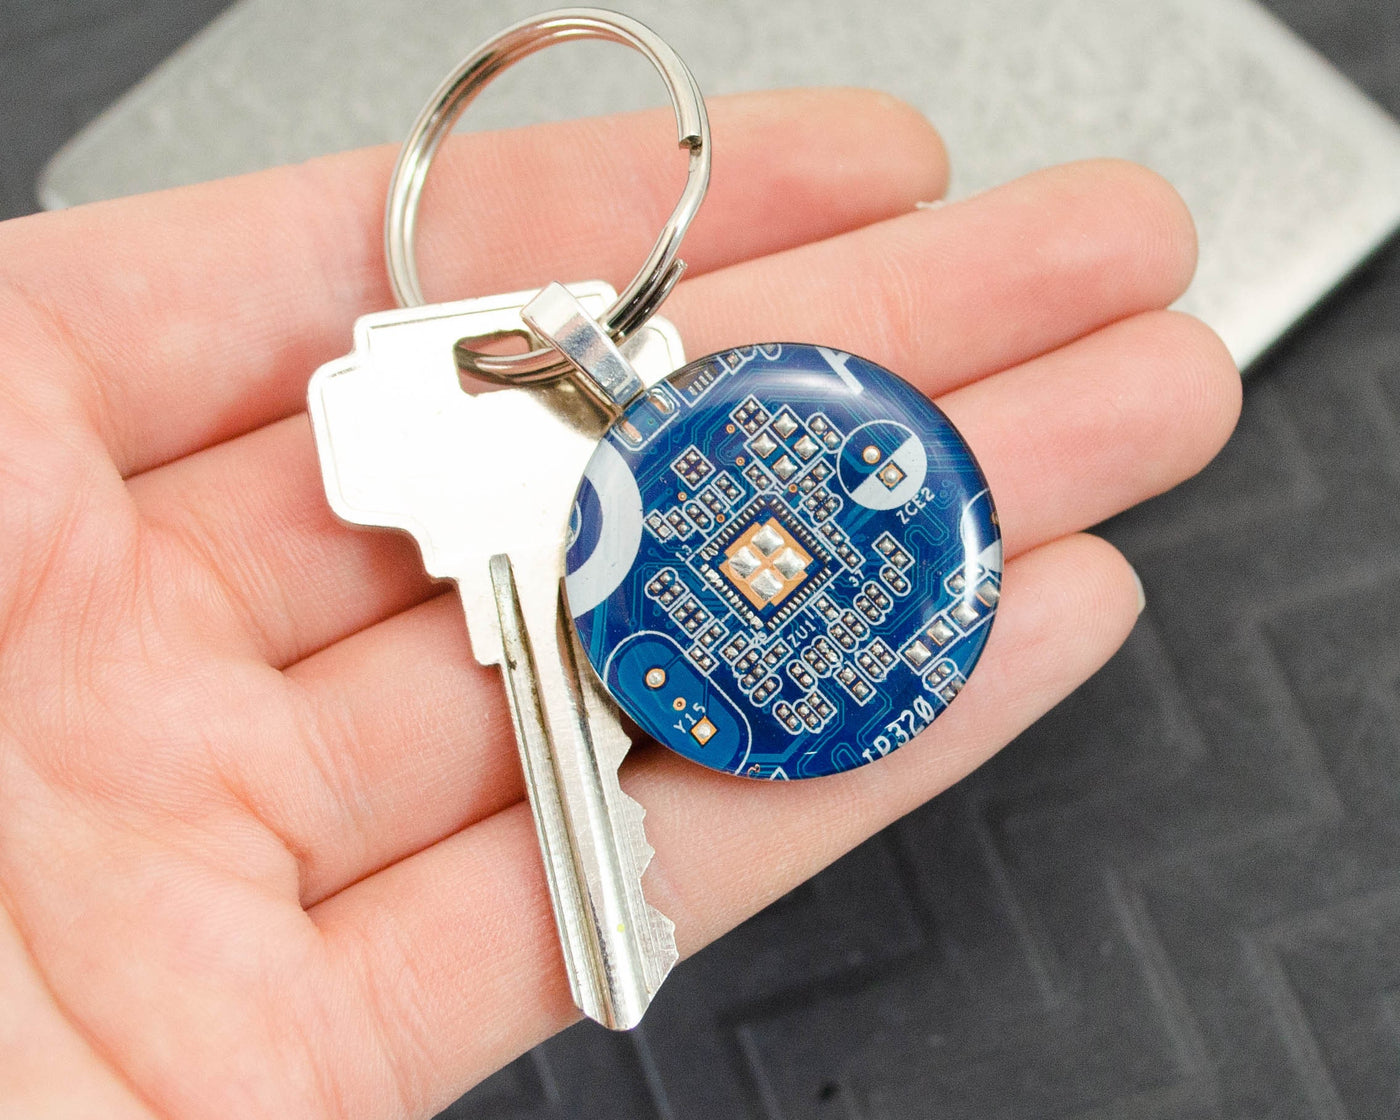 Circuit Board Keychain Blue, Computer Engineer Gift, Unique Software engineer Housewarming Gift, New Office Gift for Scientist